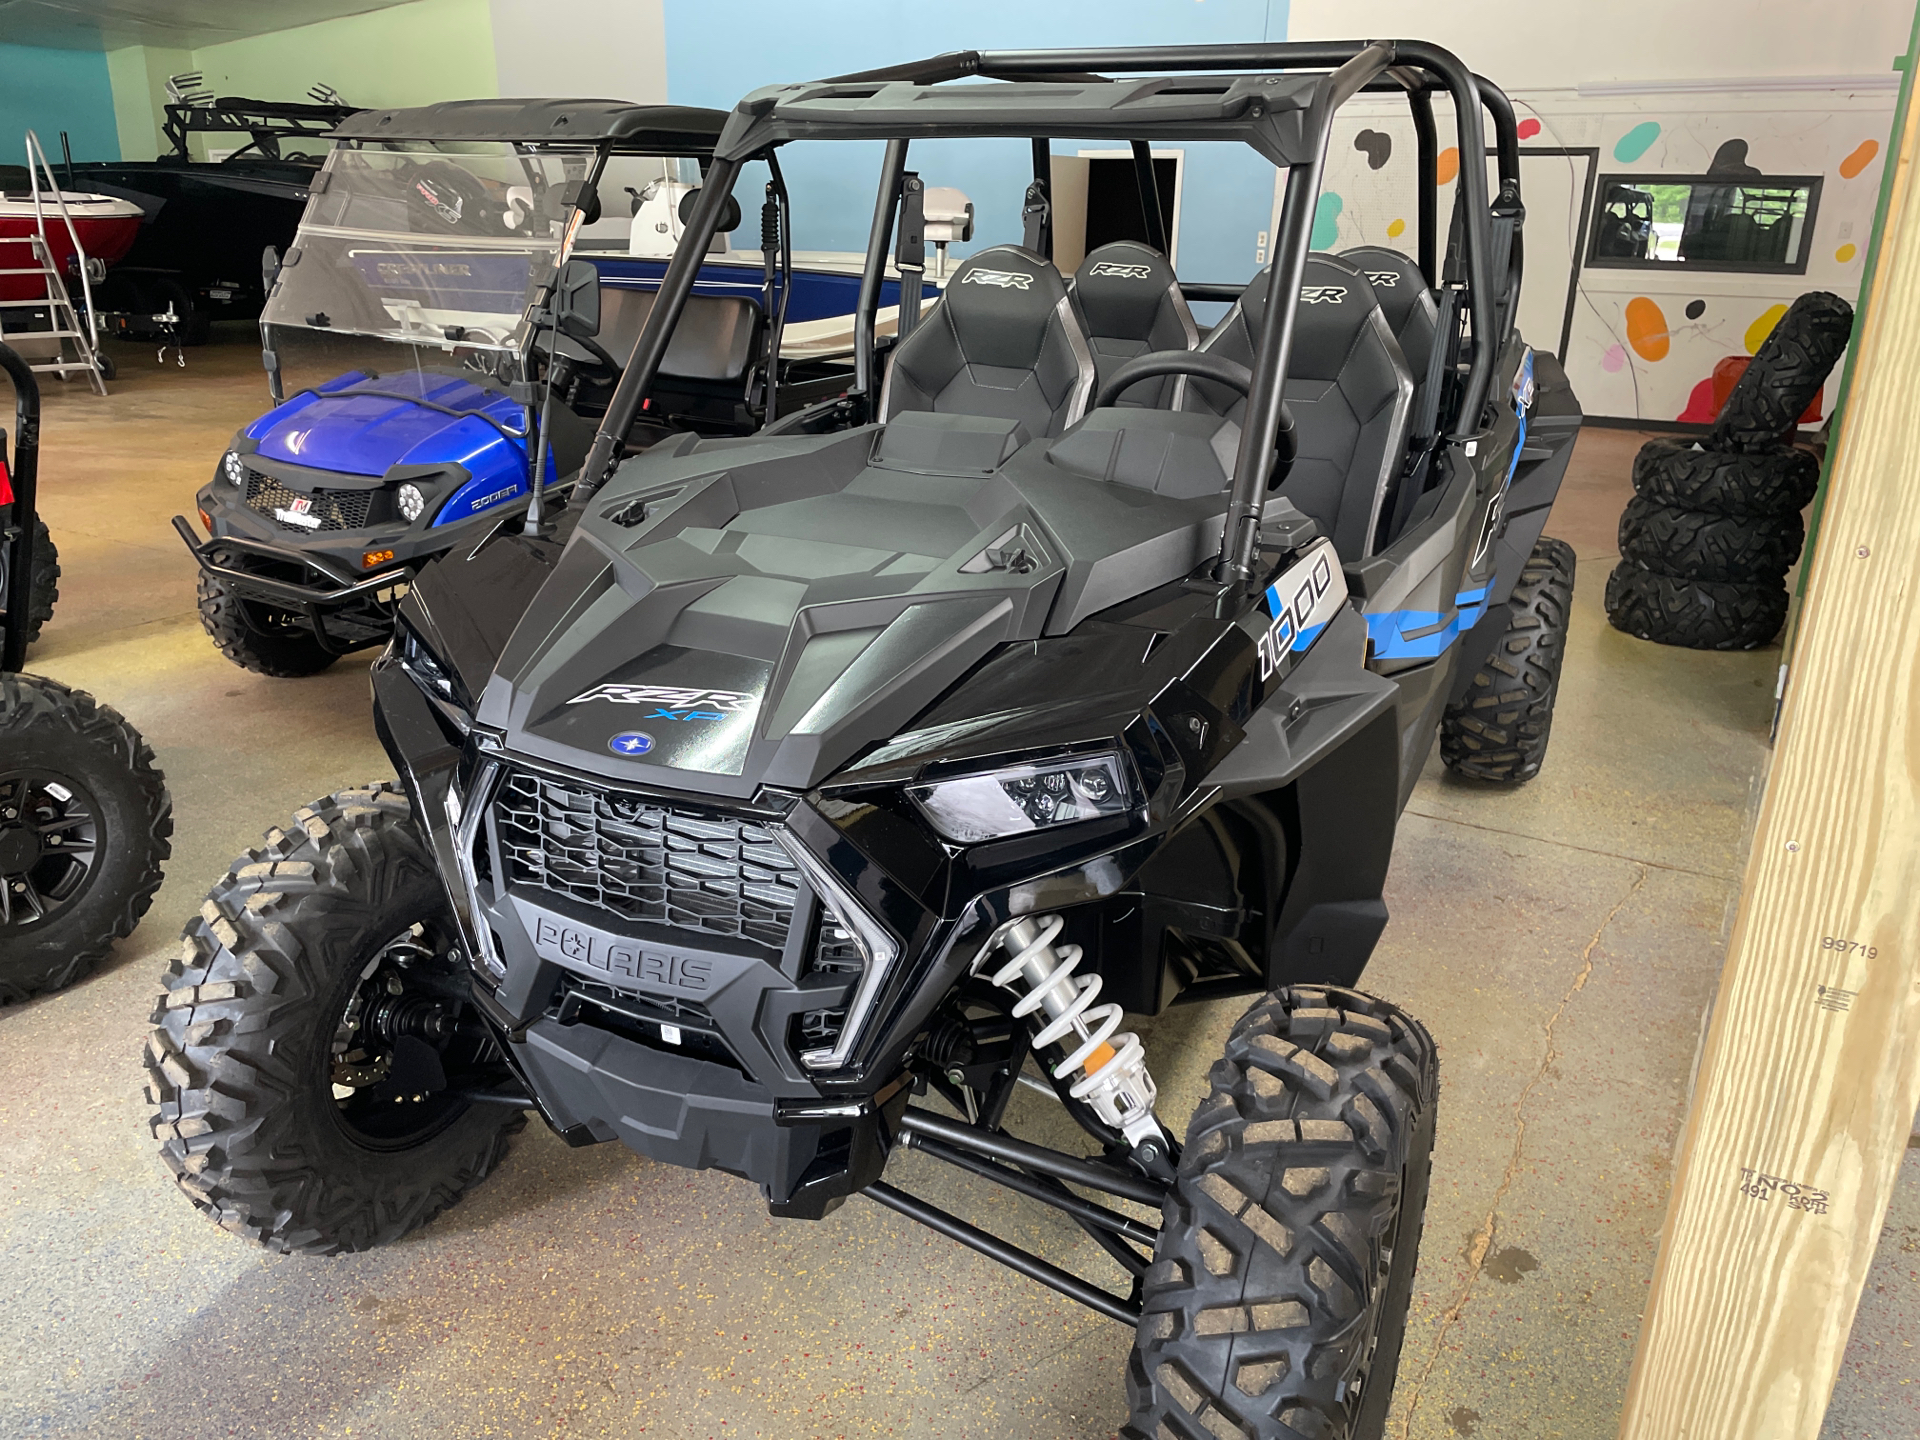 2023 Polaris RZR XP 4 1000 Ultimate in Amory, Mississippi - Photo 2